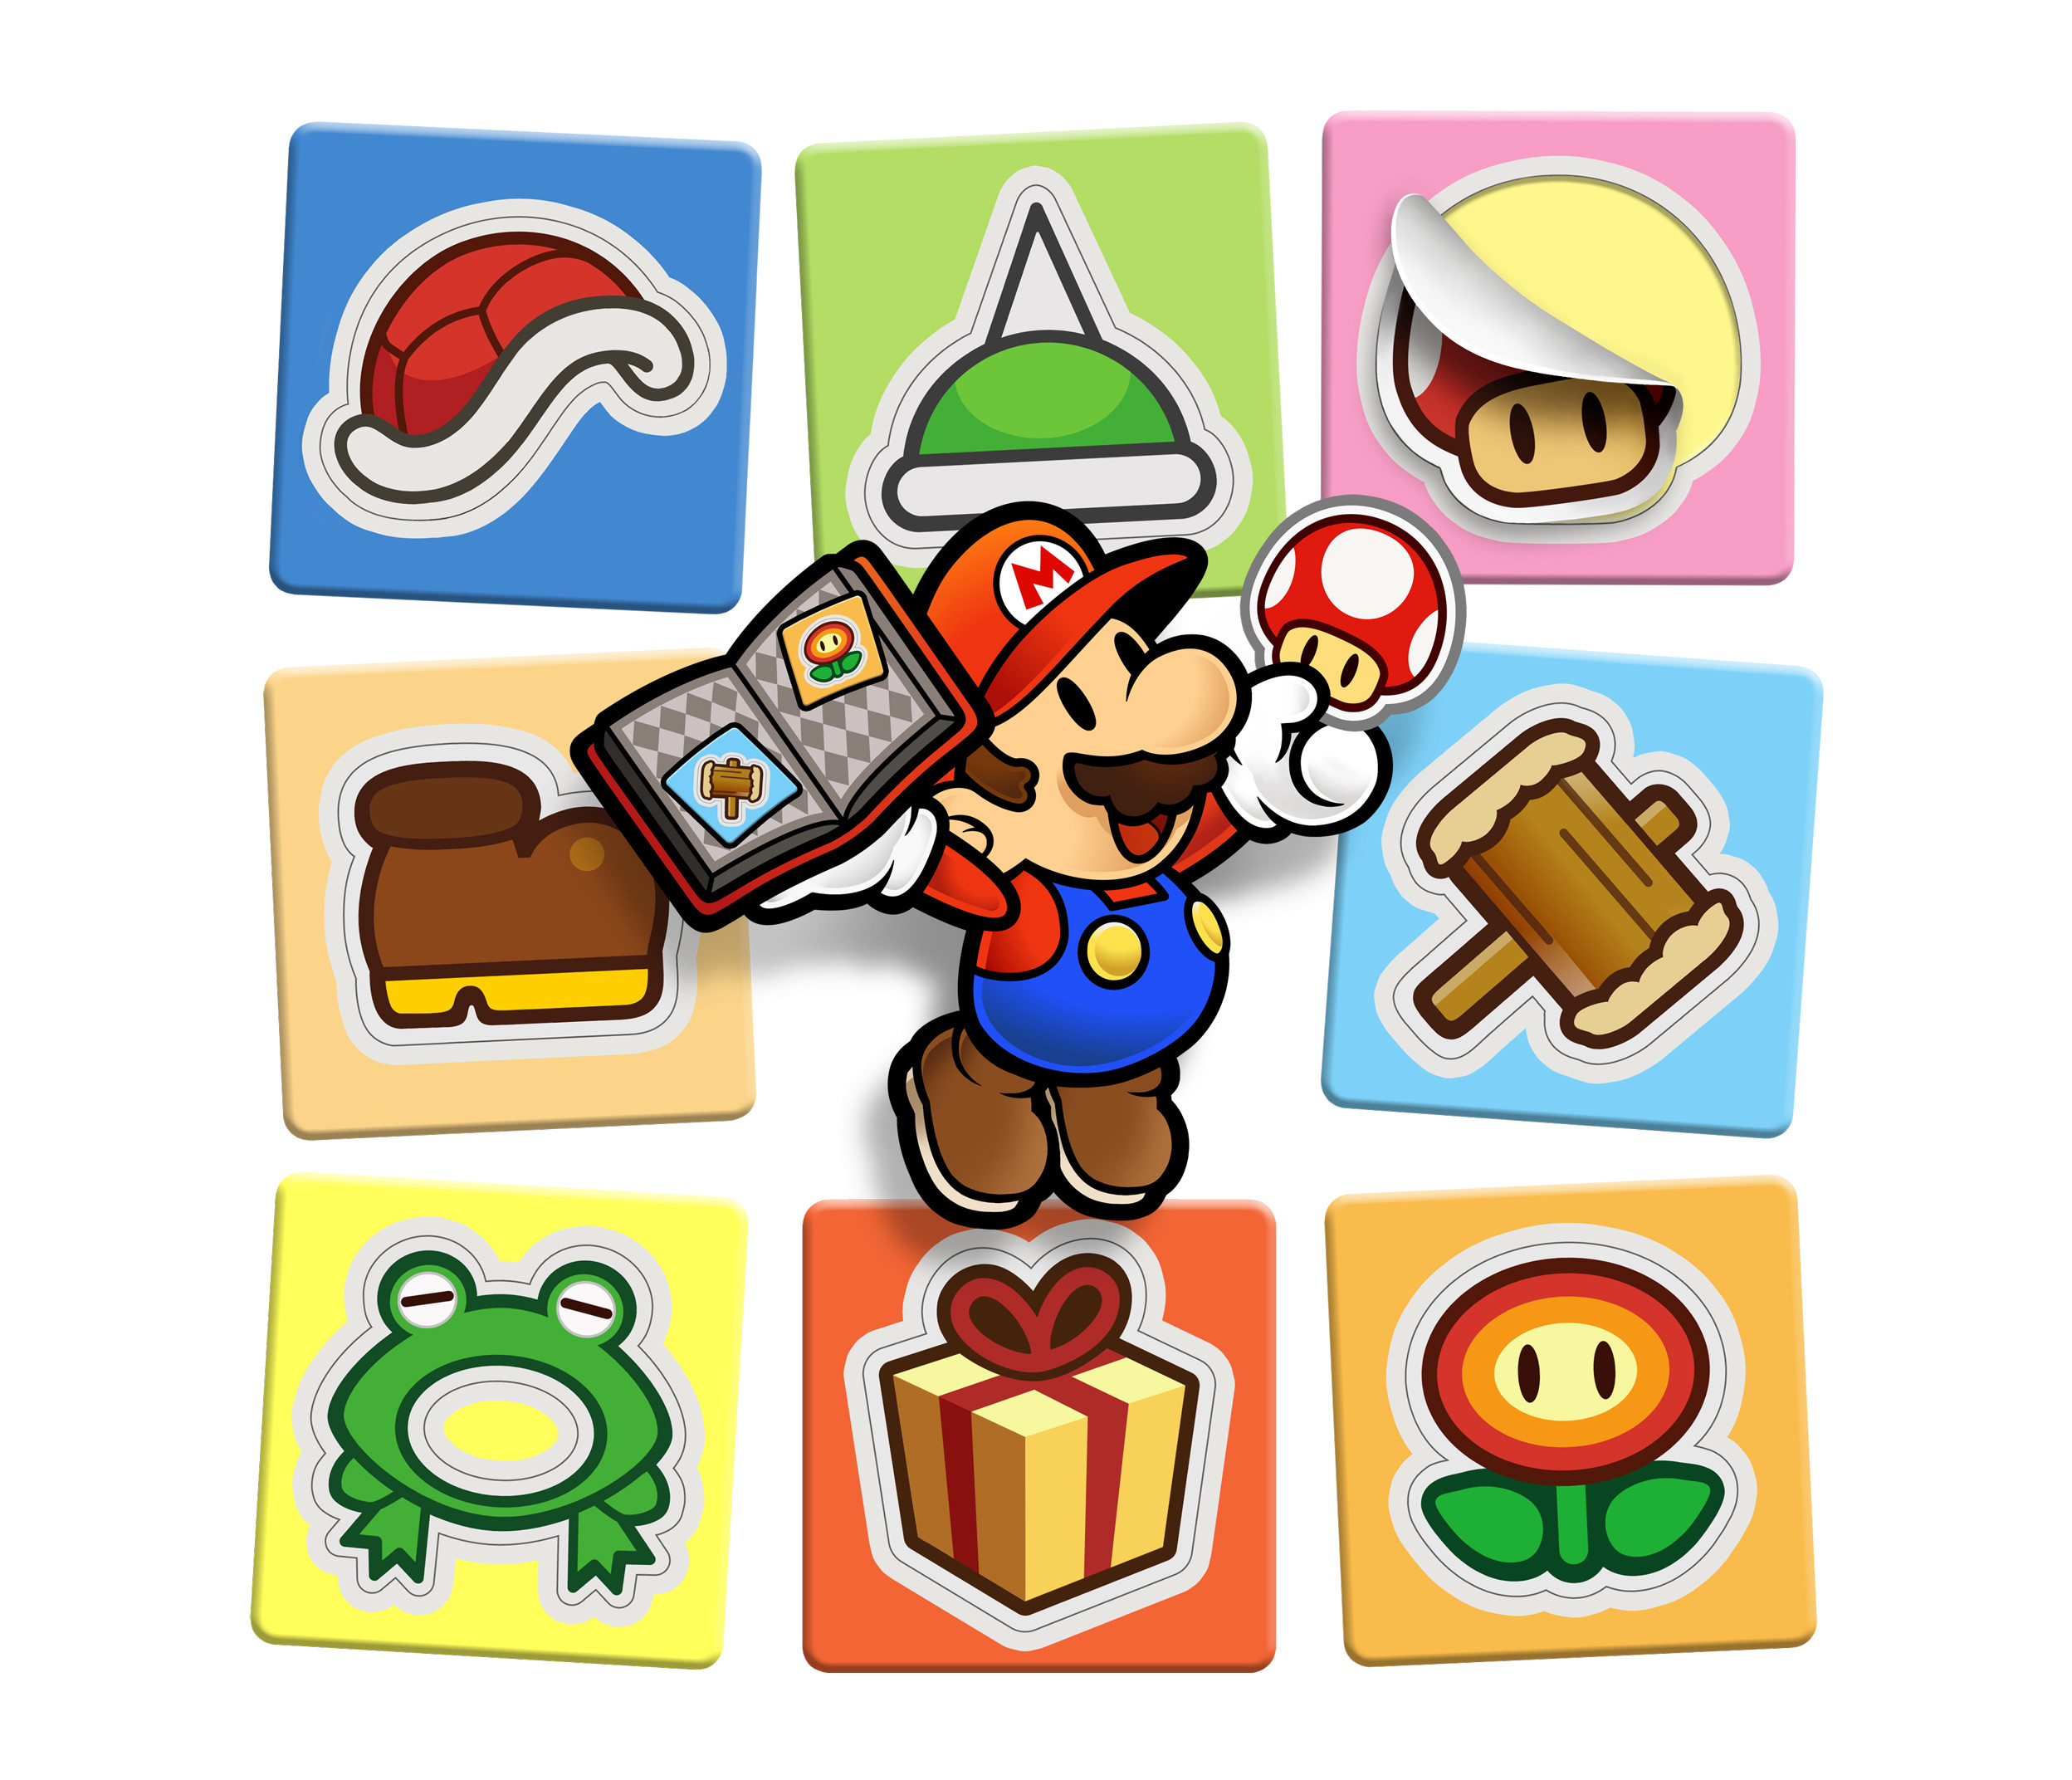 2496x2144 ... Paper mario 3ds wallpaper by. Download Â· 2560x1920 ...